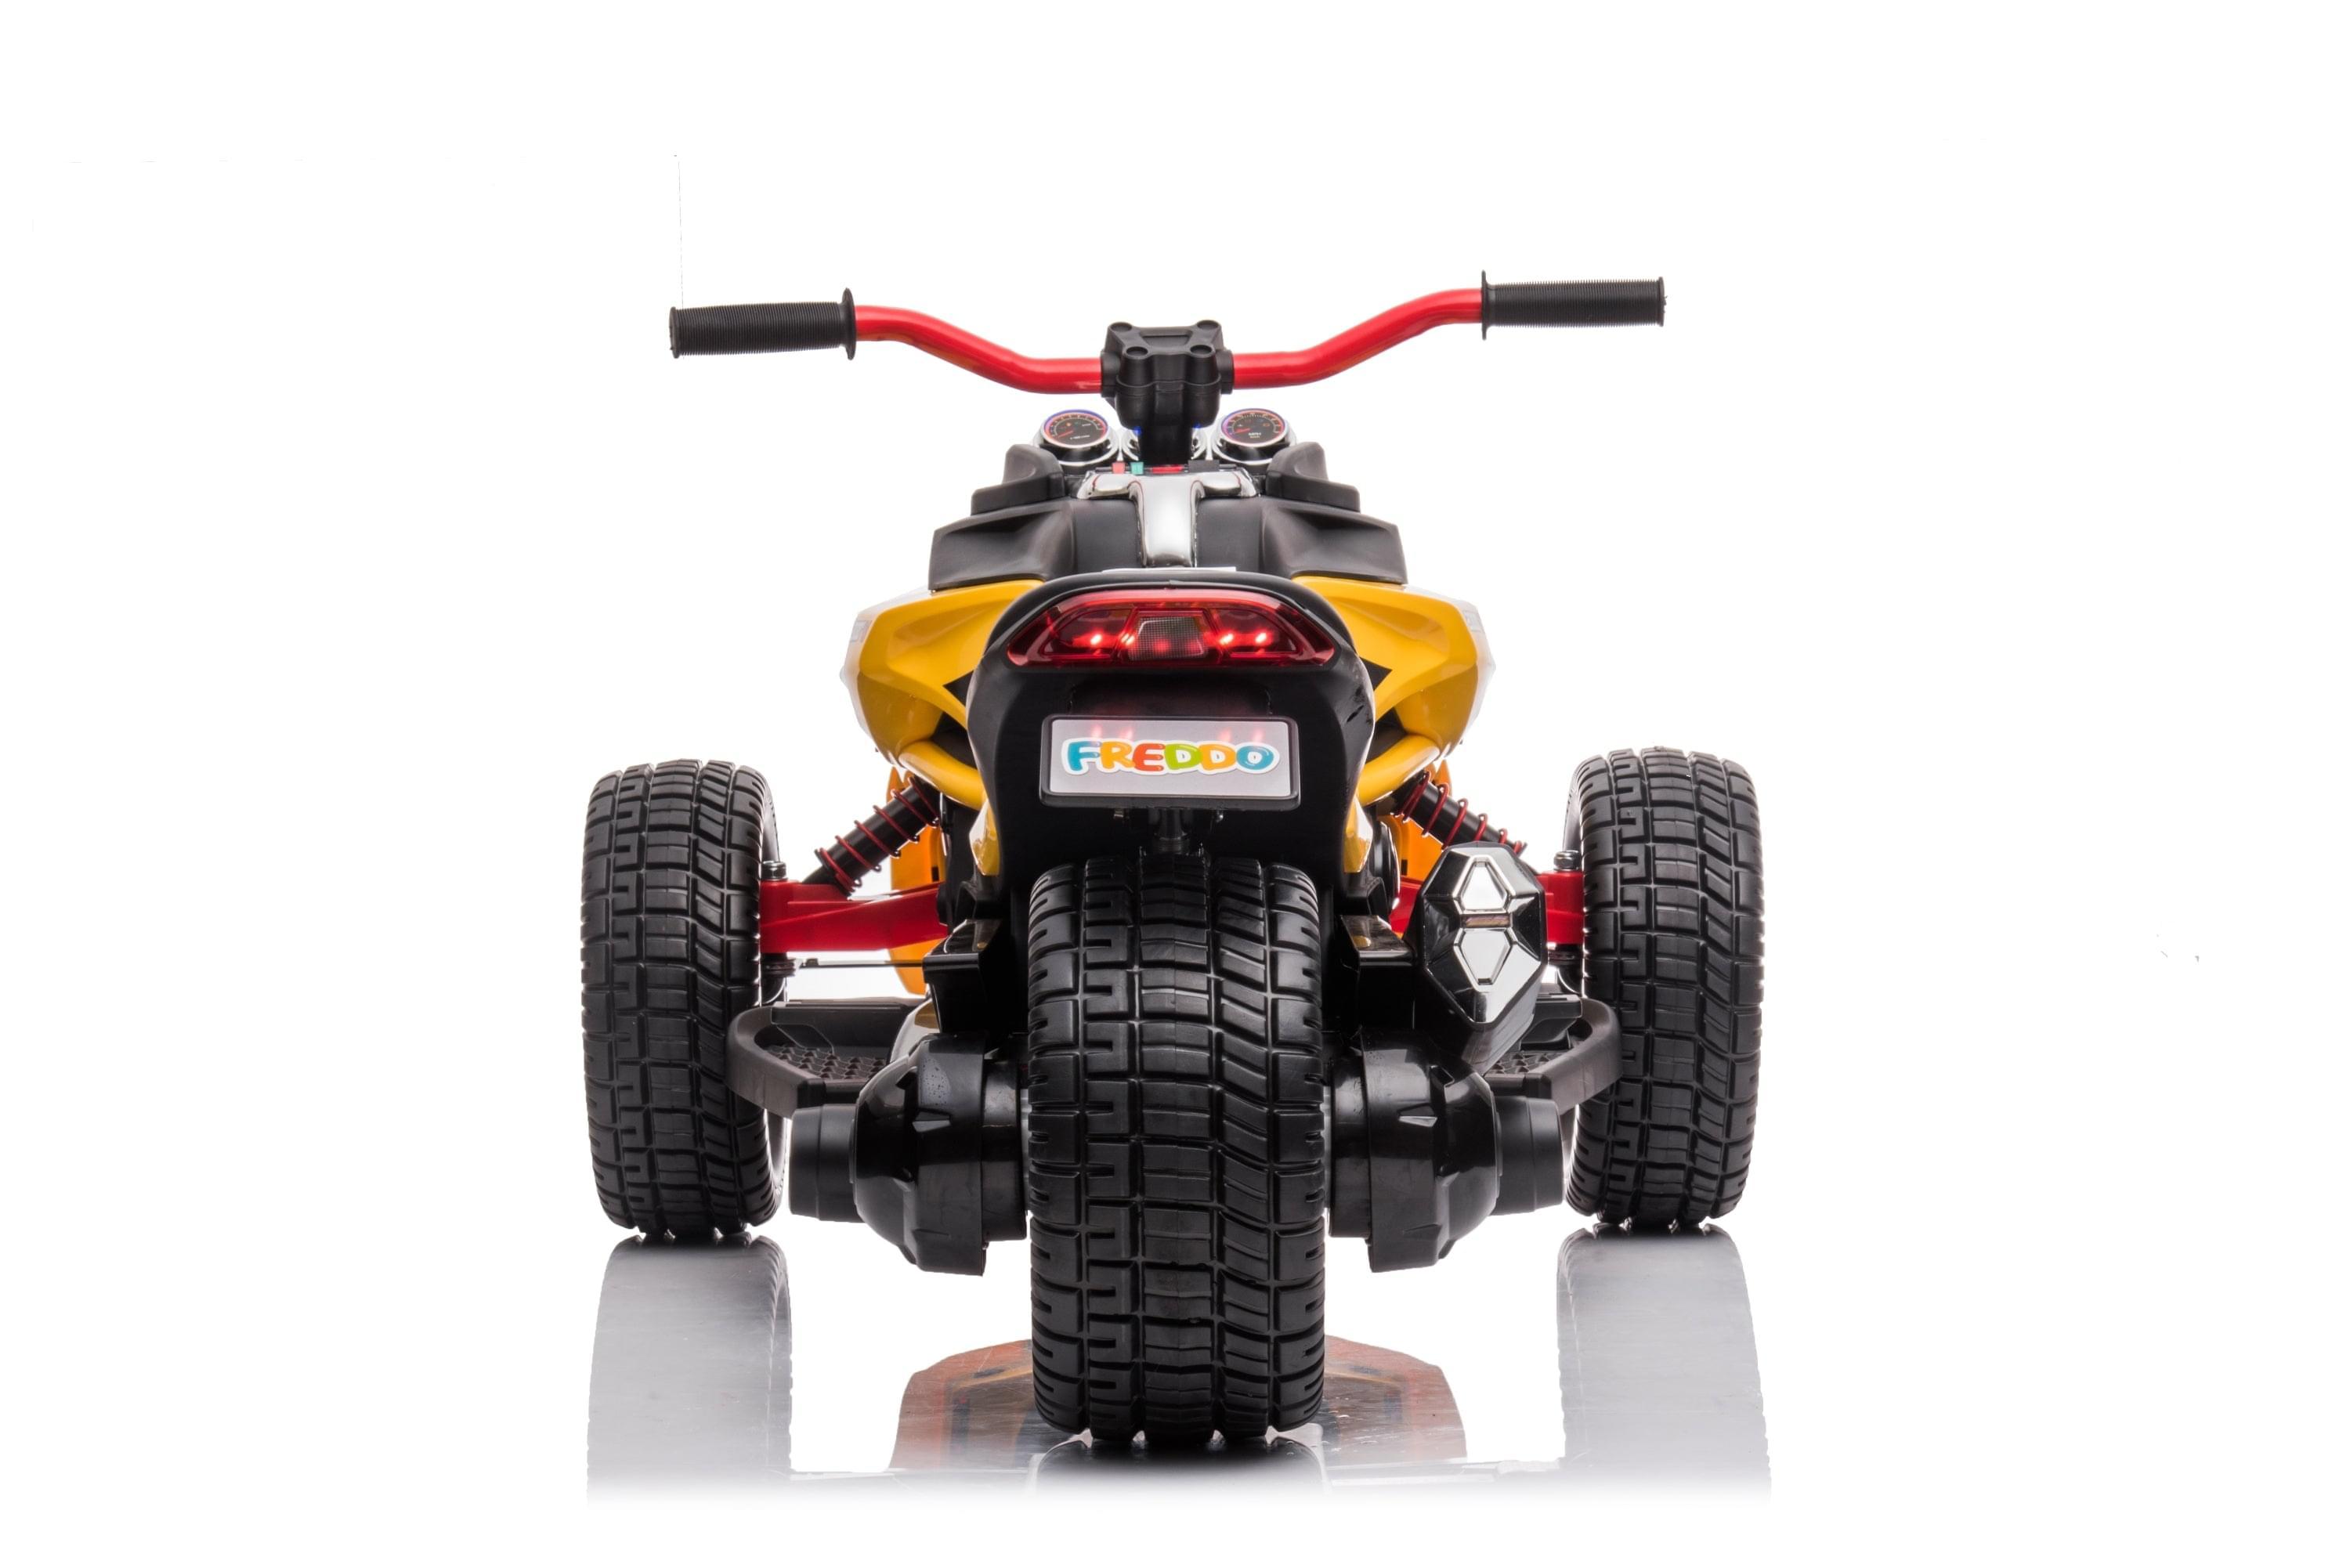 24V Freddo Spider 2 Seater Ride-On 3 Wheel Motorcycle - DTI Direct USA